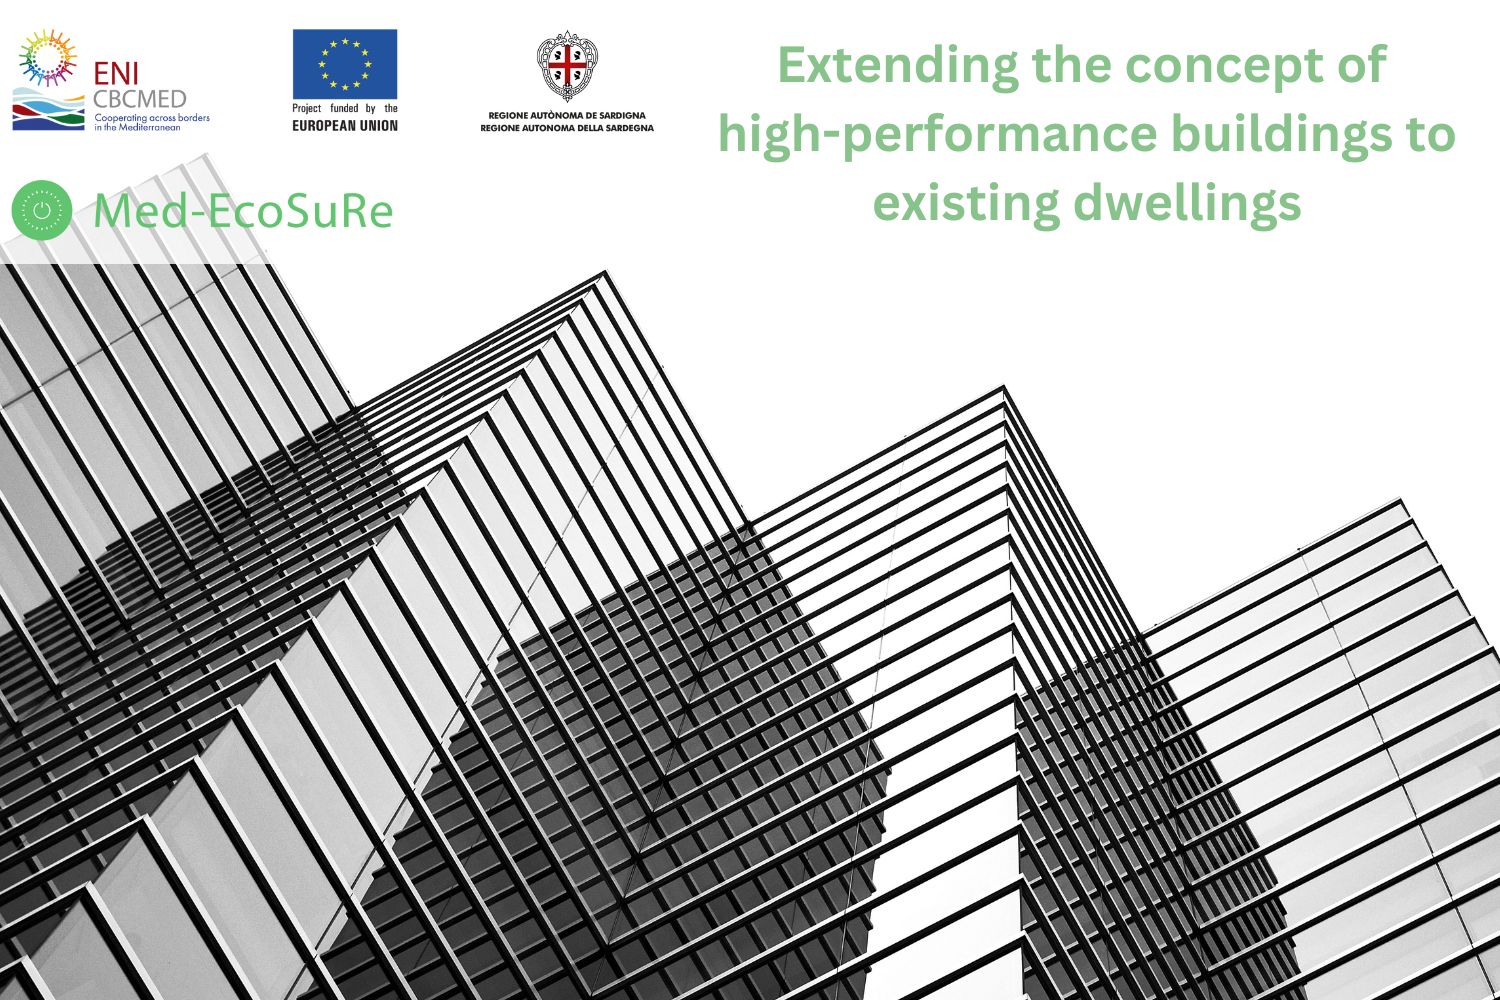 Med-EcoSuRe is extending the concept of high-performance buildings to existing dwellings